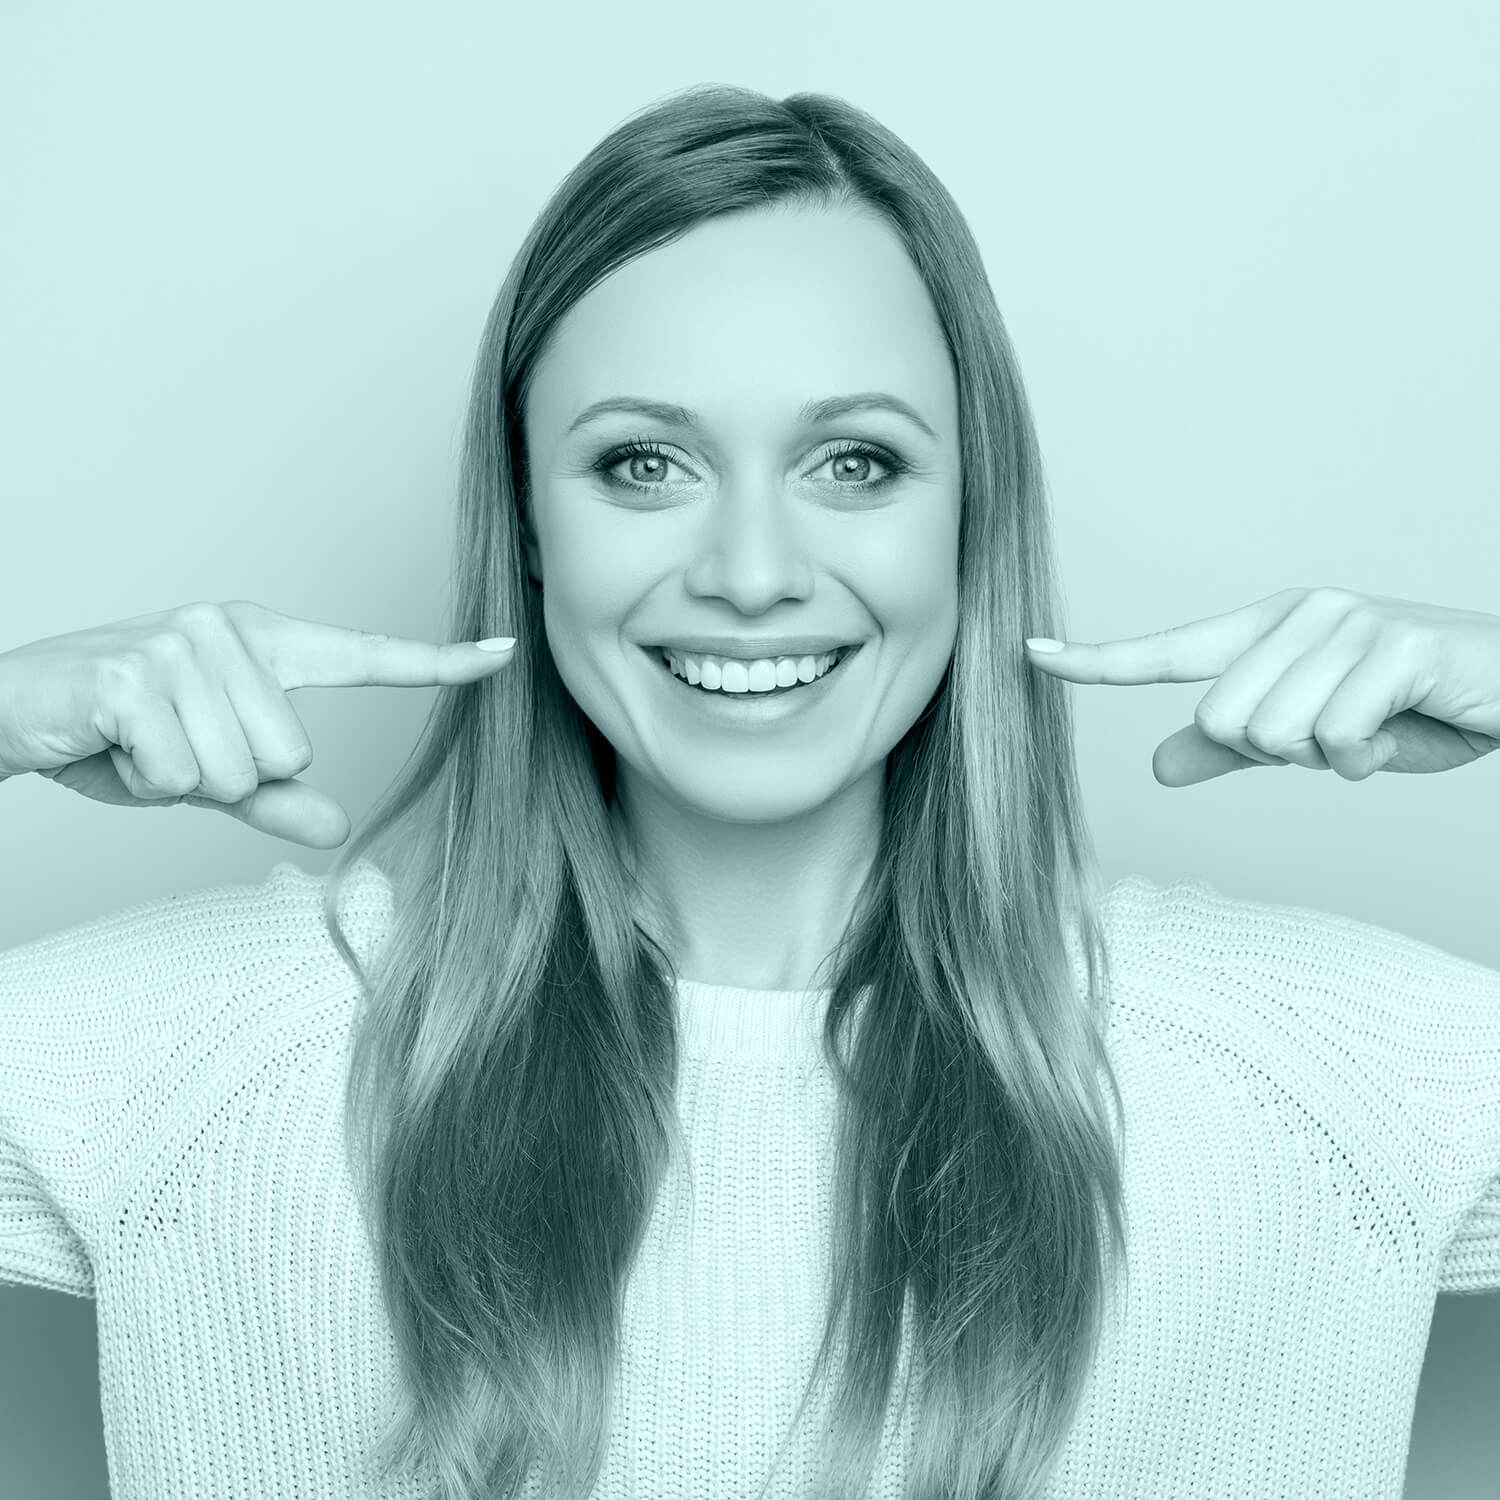 image of a girl pointing at her teeth smiling